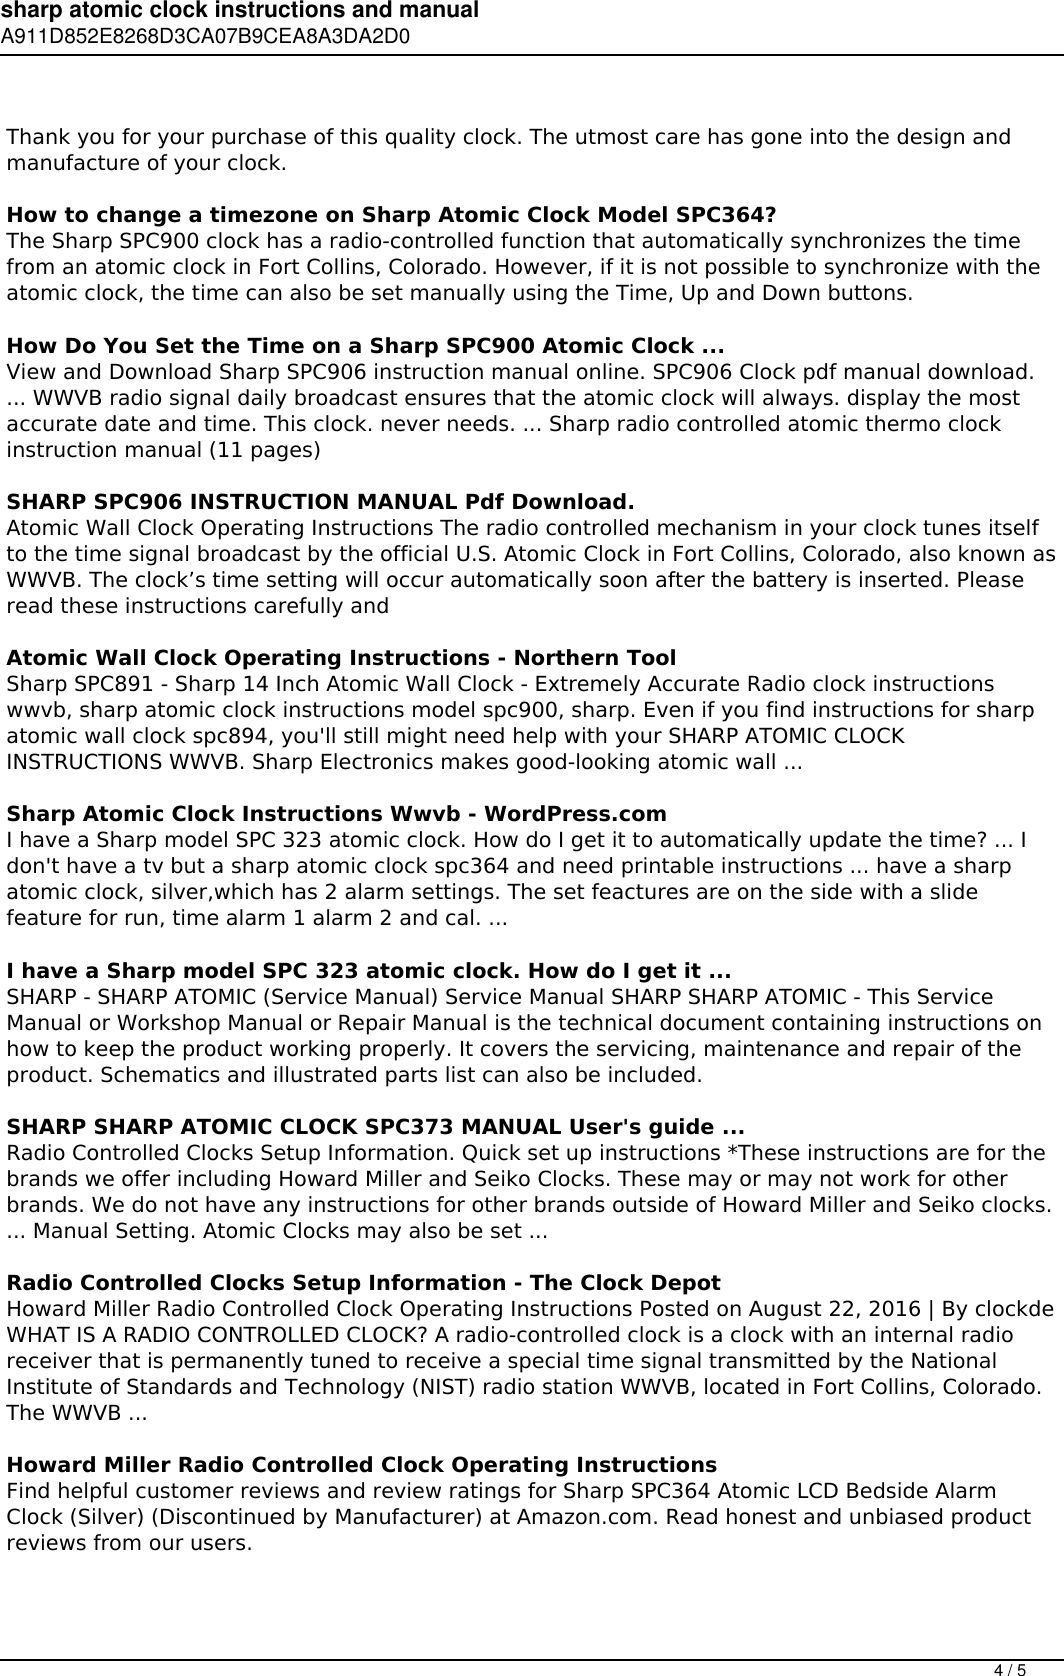 Page 4 of 5 - Sharp Atomic Clock Instructions And Manual